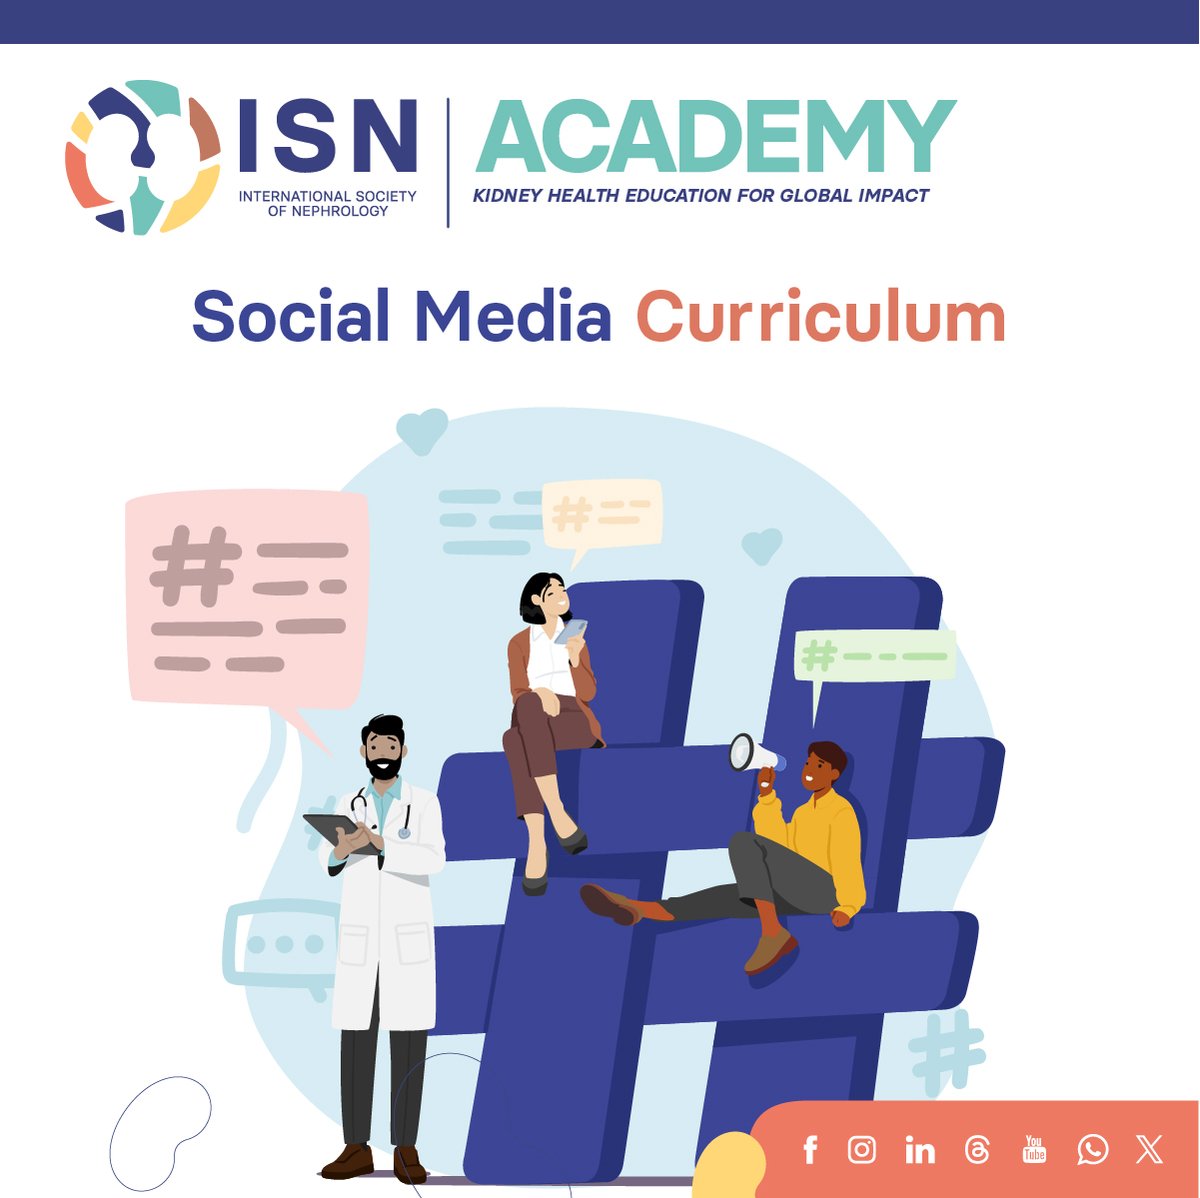 @acssjr @Dilushiwijay @divyaa24 @Ironken6 @nephromythri @DrSumanBehera @myadla @FerArceAmare Start warming up for the #ISNWCN Space by taking the ISN Social Media Curriculum, which helps navigate and leverage social media tools effectively. Access the curriculum, including new modules, here: academy.theisn.org/products/at-is…